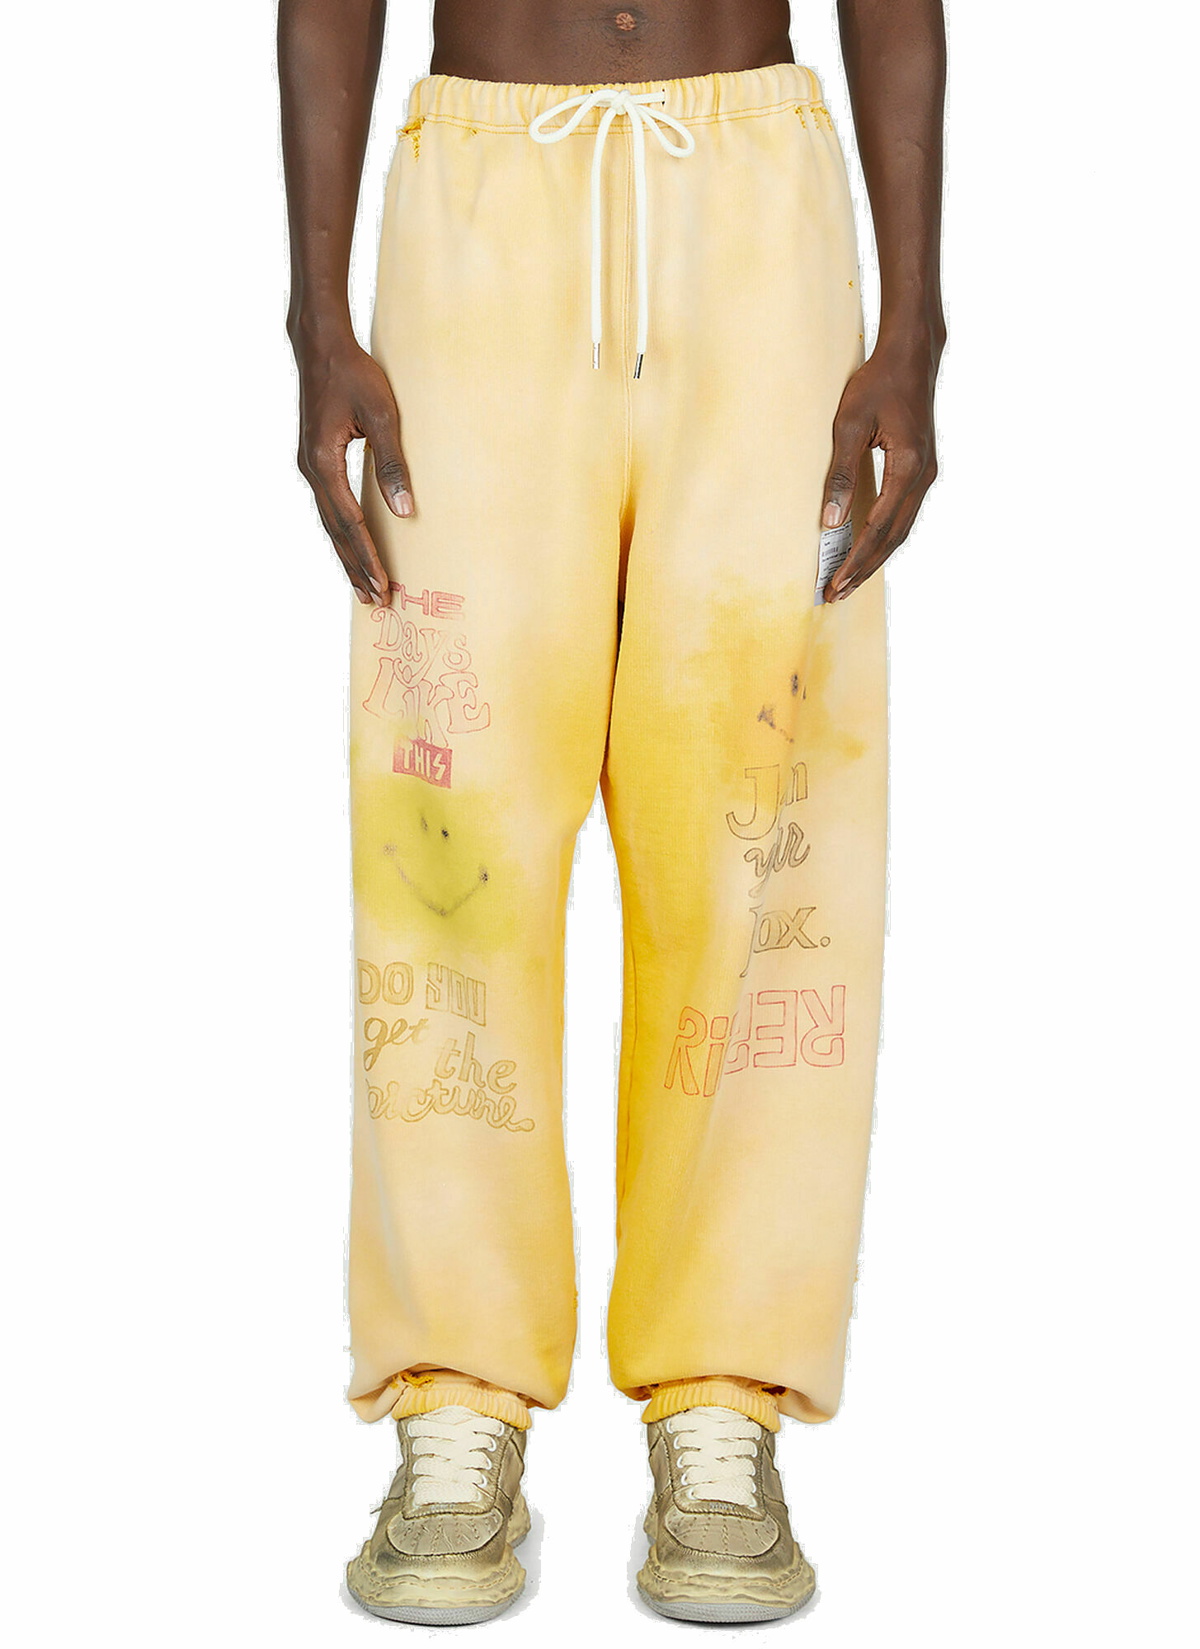 OFF-WHITE Pants for Boys on sale - Best Prices in Philippines - Philippines  price | FASHIOLA